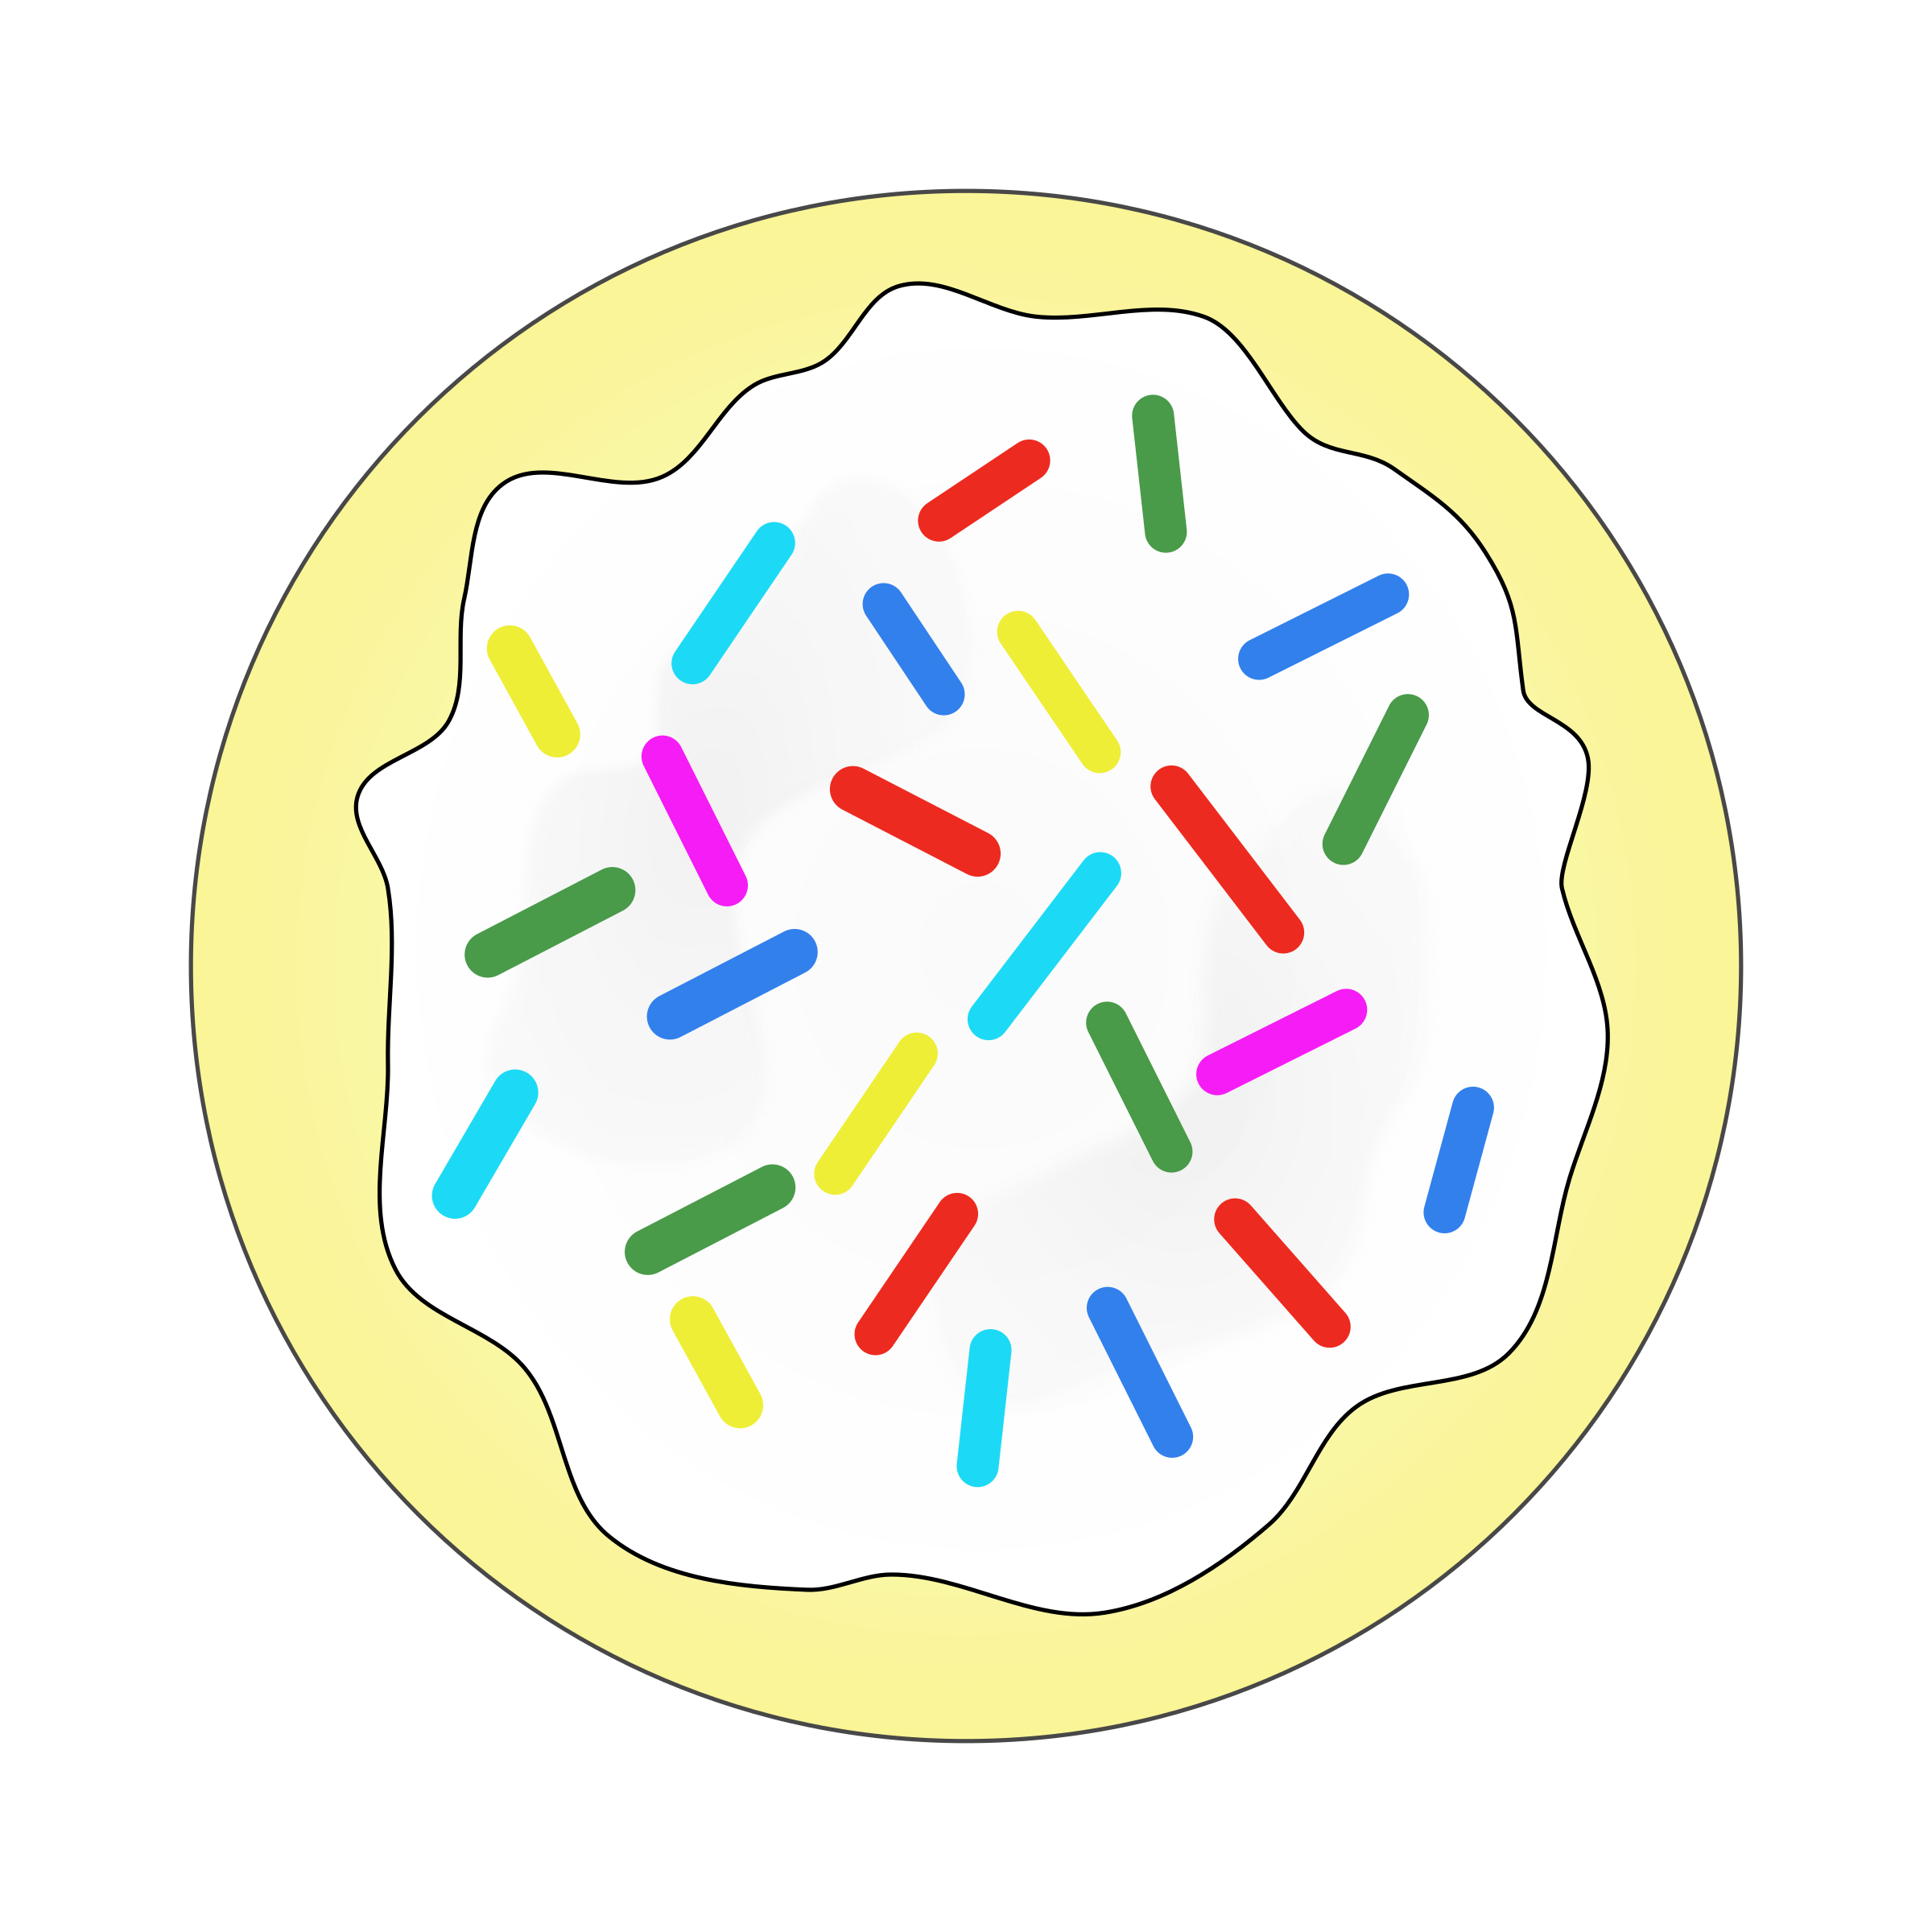 sugar cookie clipart png